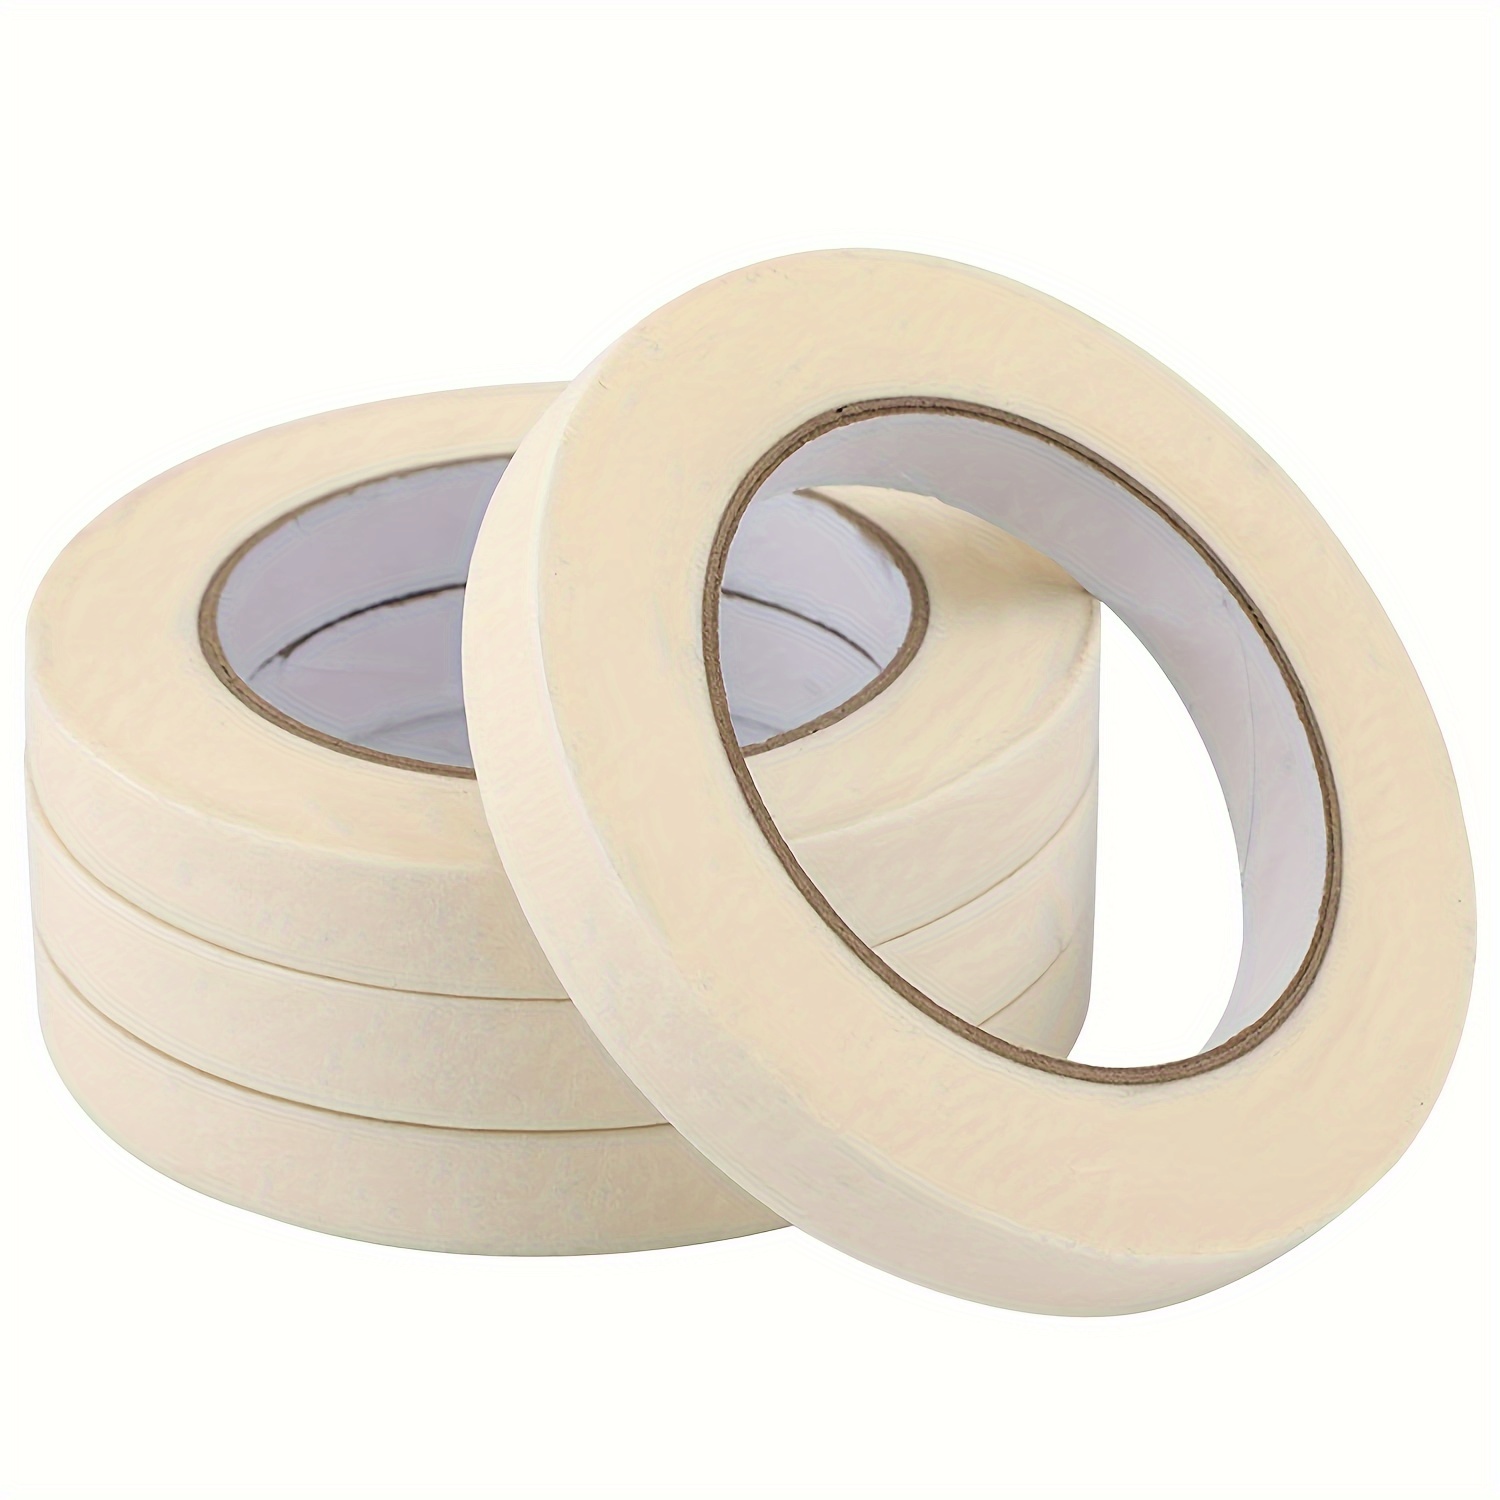 3 Roll 15mm x 30m/98.4ft Double-Sided Adhesive Tape Paper Backing DIY Crafts